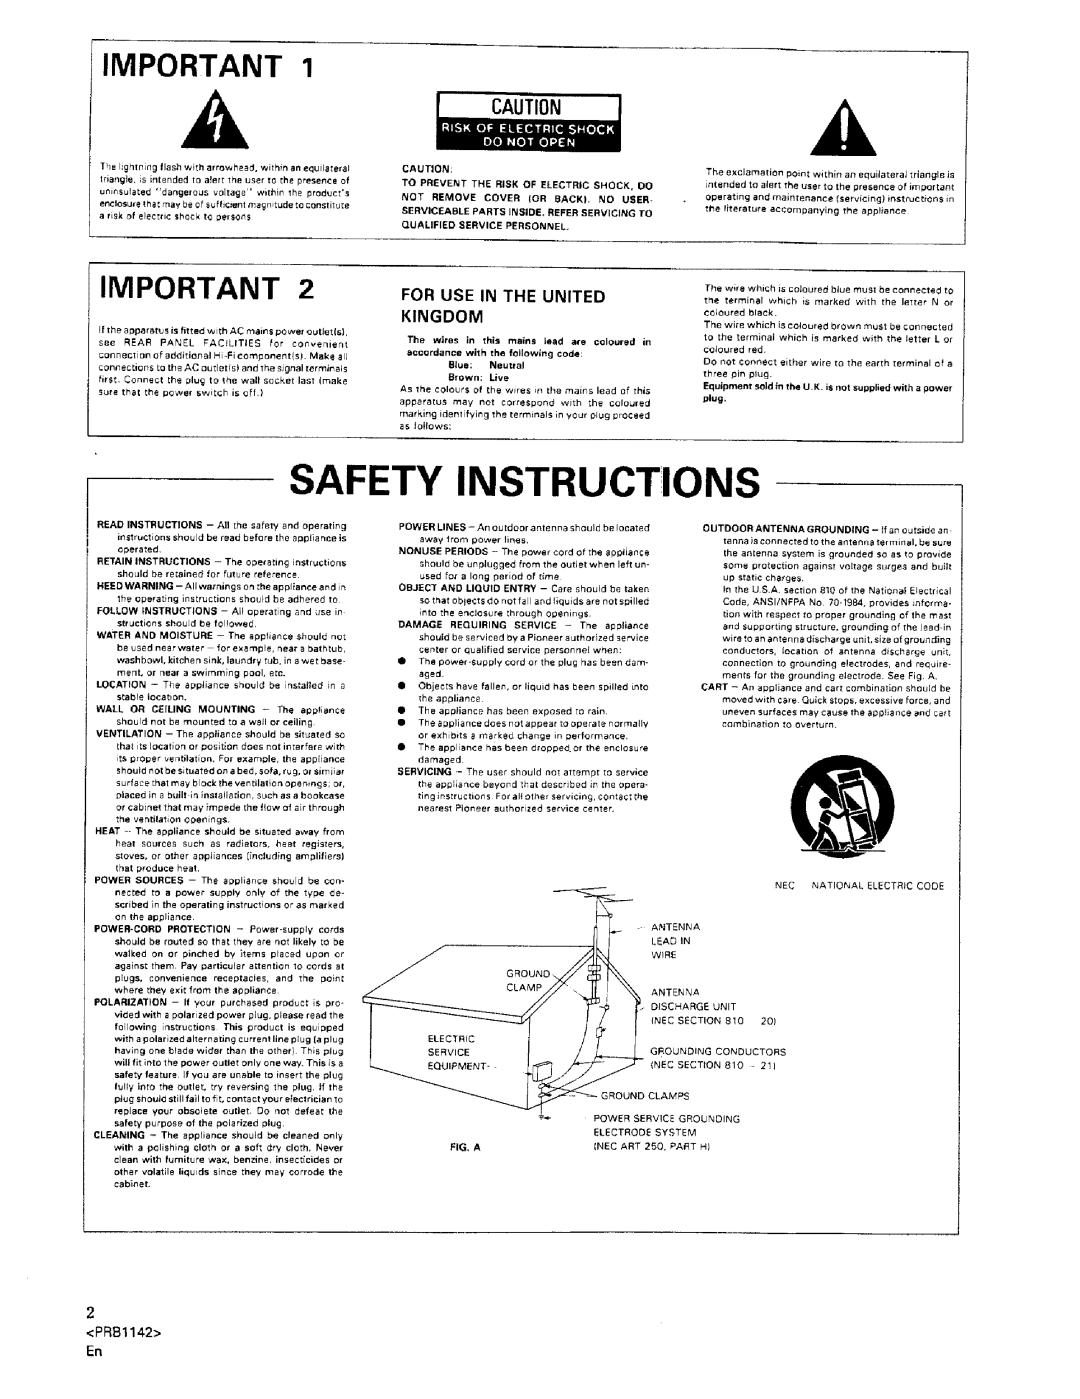 Pioneer PD-M550 Safety Instructions, Grounding, Power Service, Electrode System, Fig. A, Nec Art, 250, PART HI, Conductors 